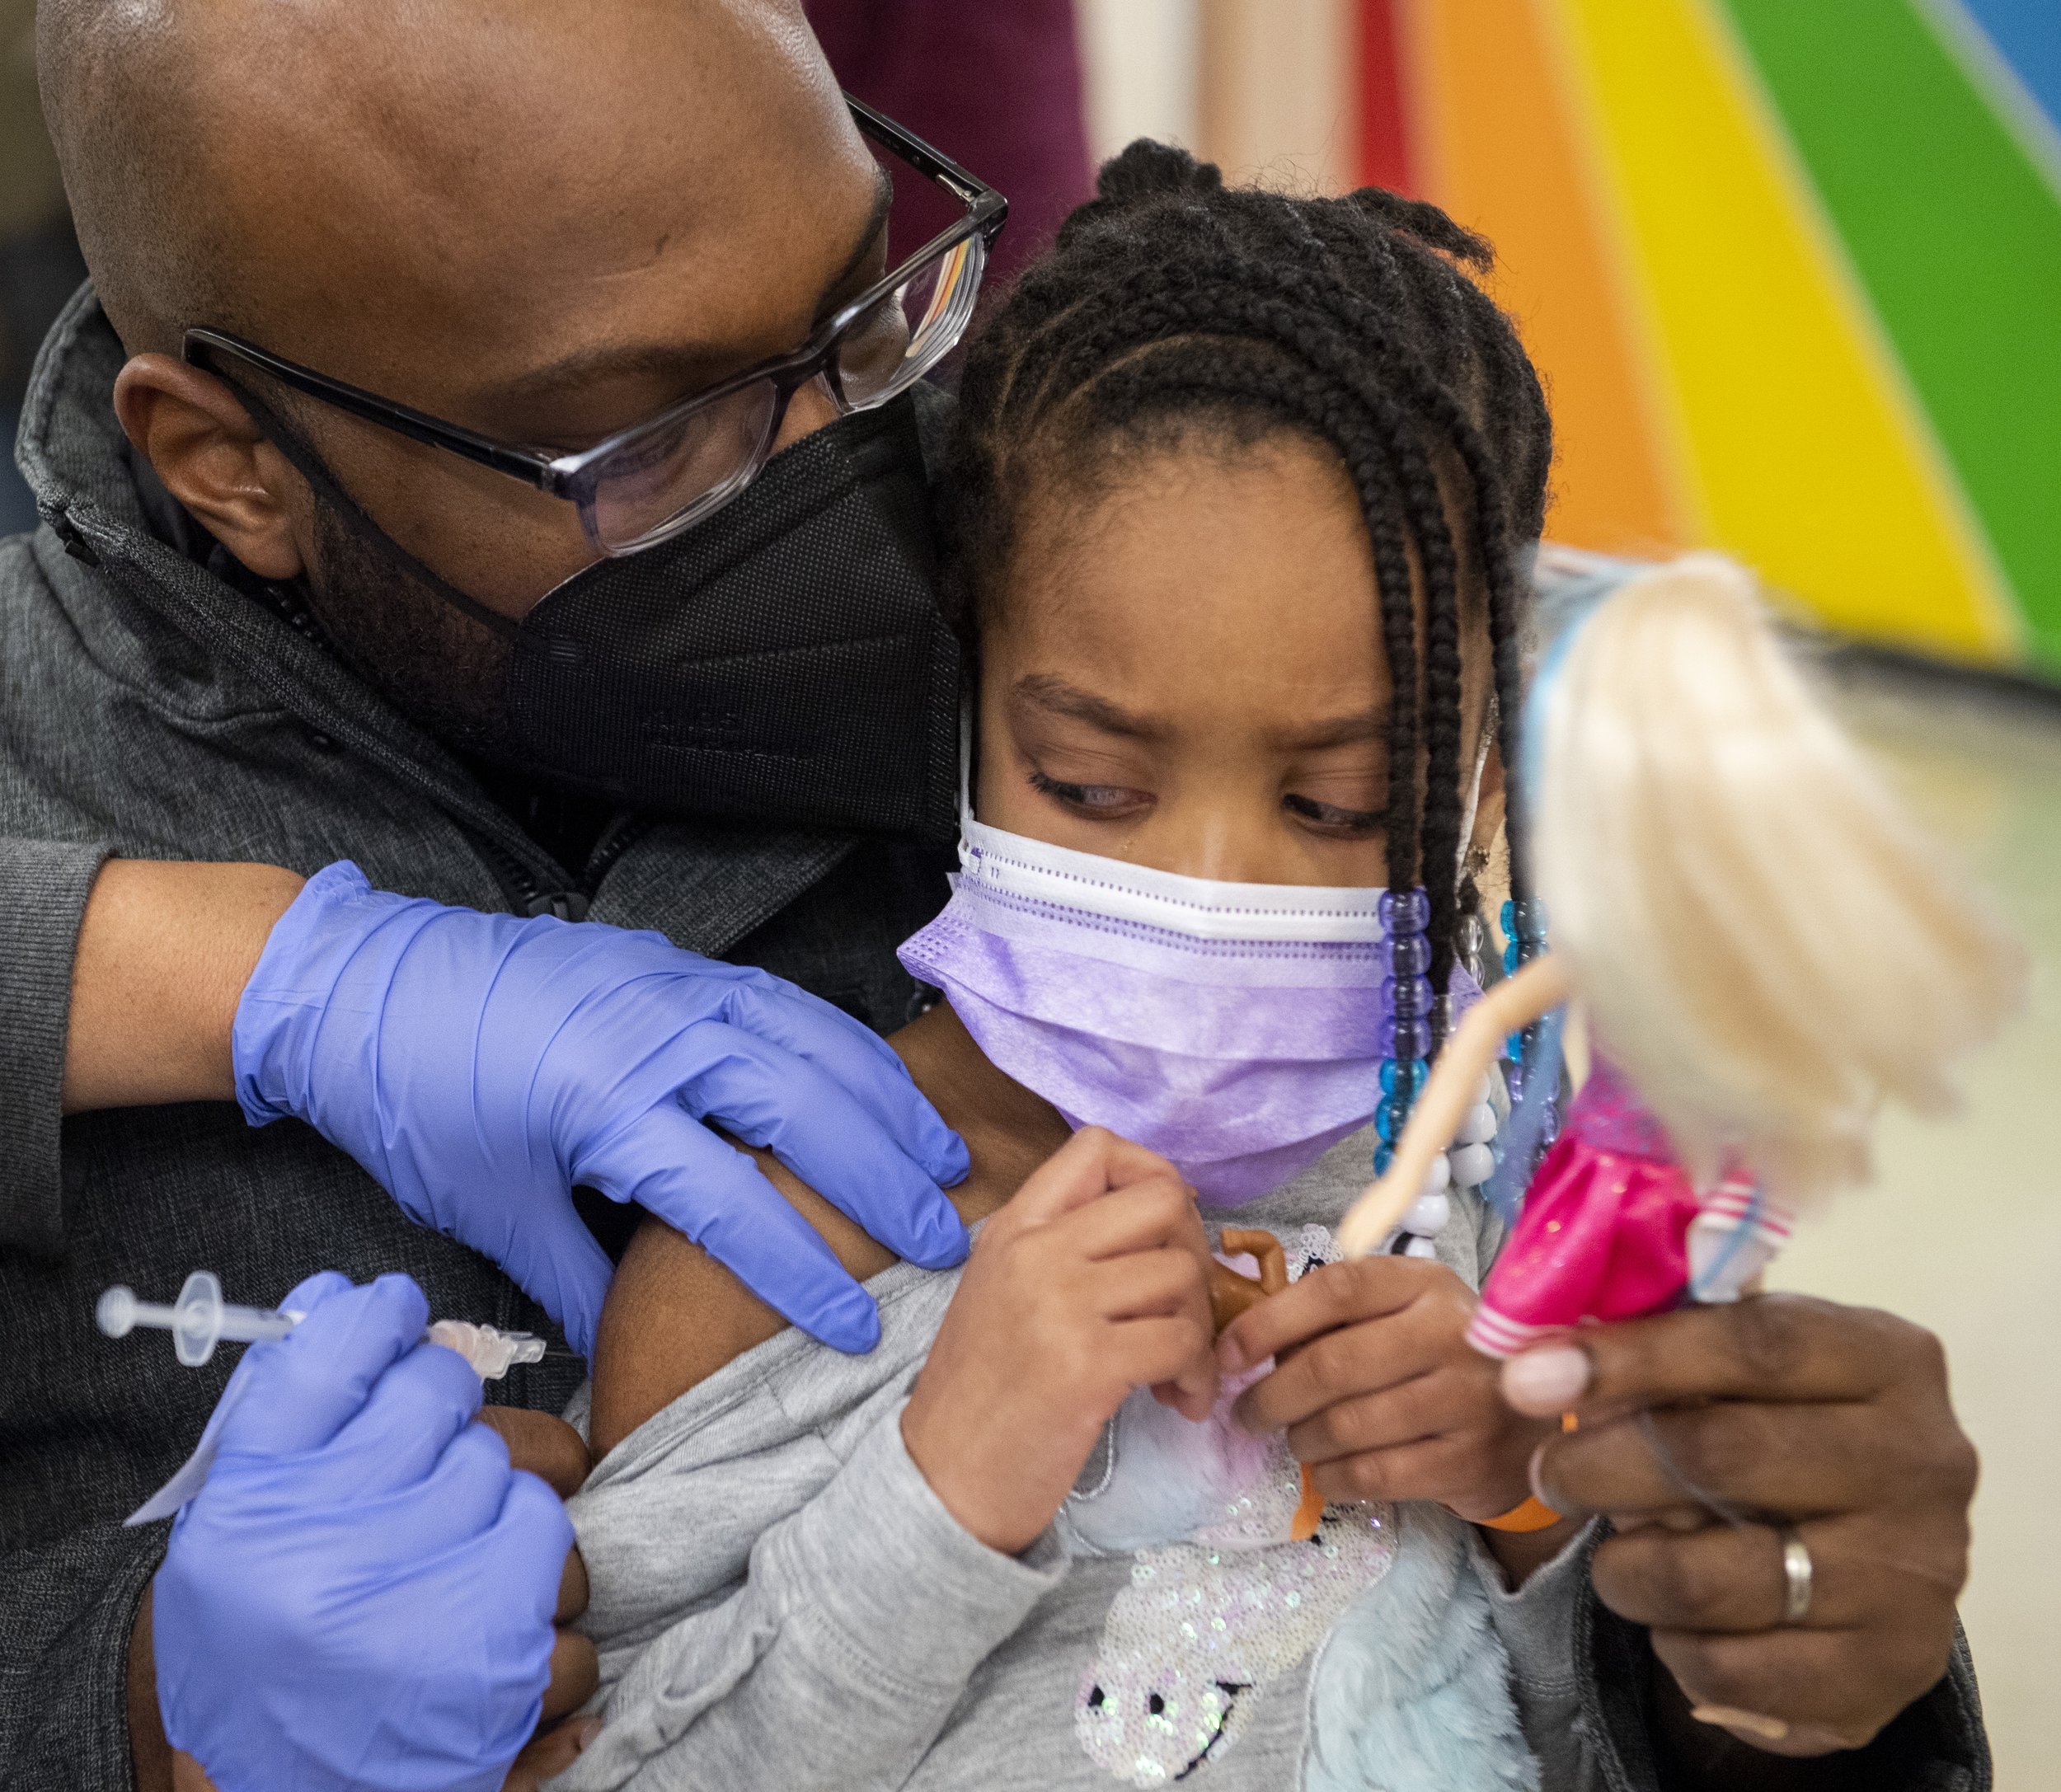  Ariyona Coleman, 5, of Crafton watches as she receives her first dose of the Pfizer vaccine from Lynne Oncea, a nurse with UPMC, while her father Antawn Coleman, also of Crafton, tries to distract her with a doll on Saturday, Jan. 8, 2022, in the ca